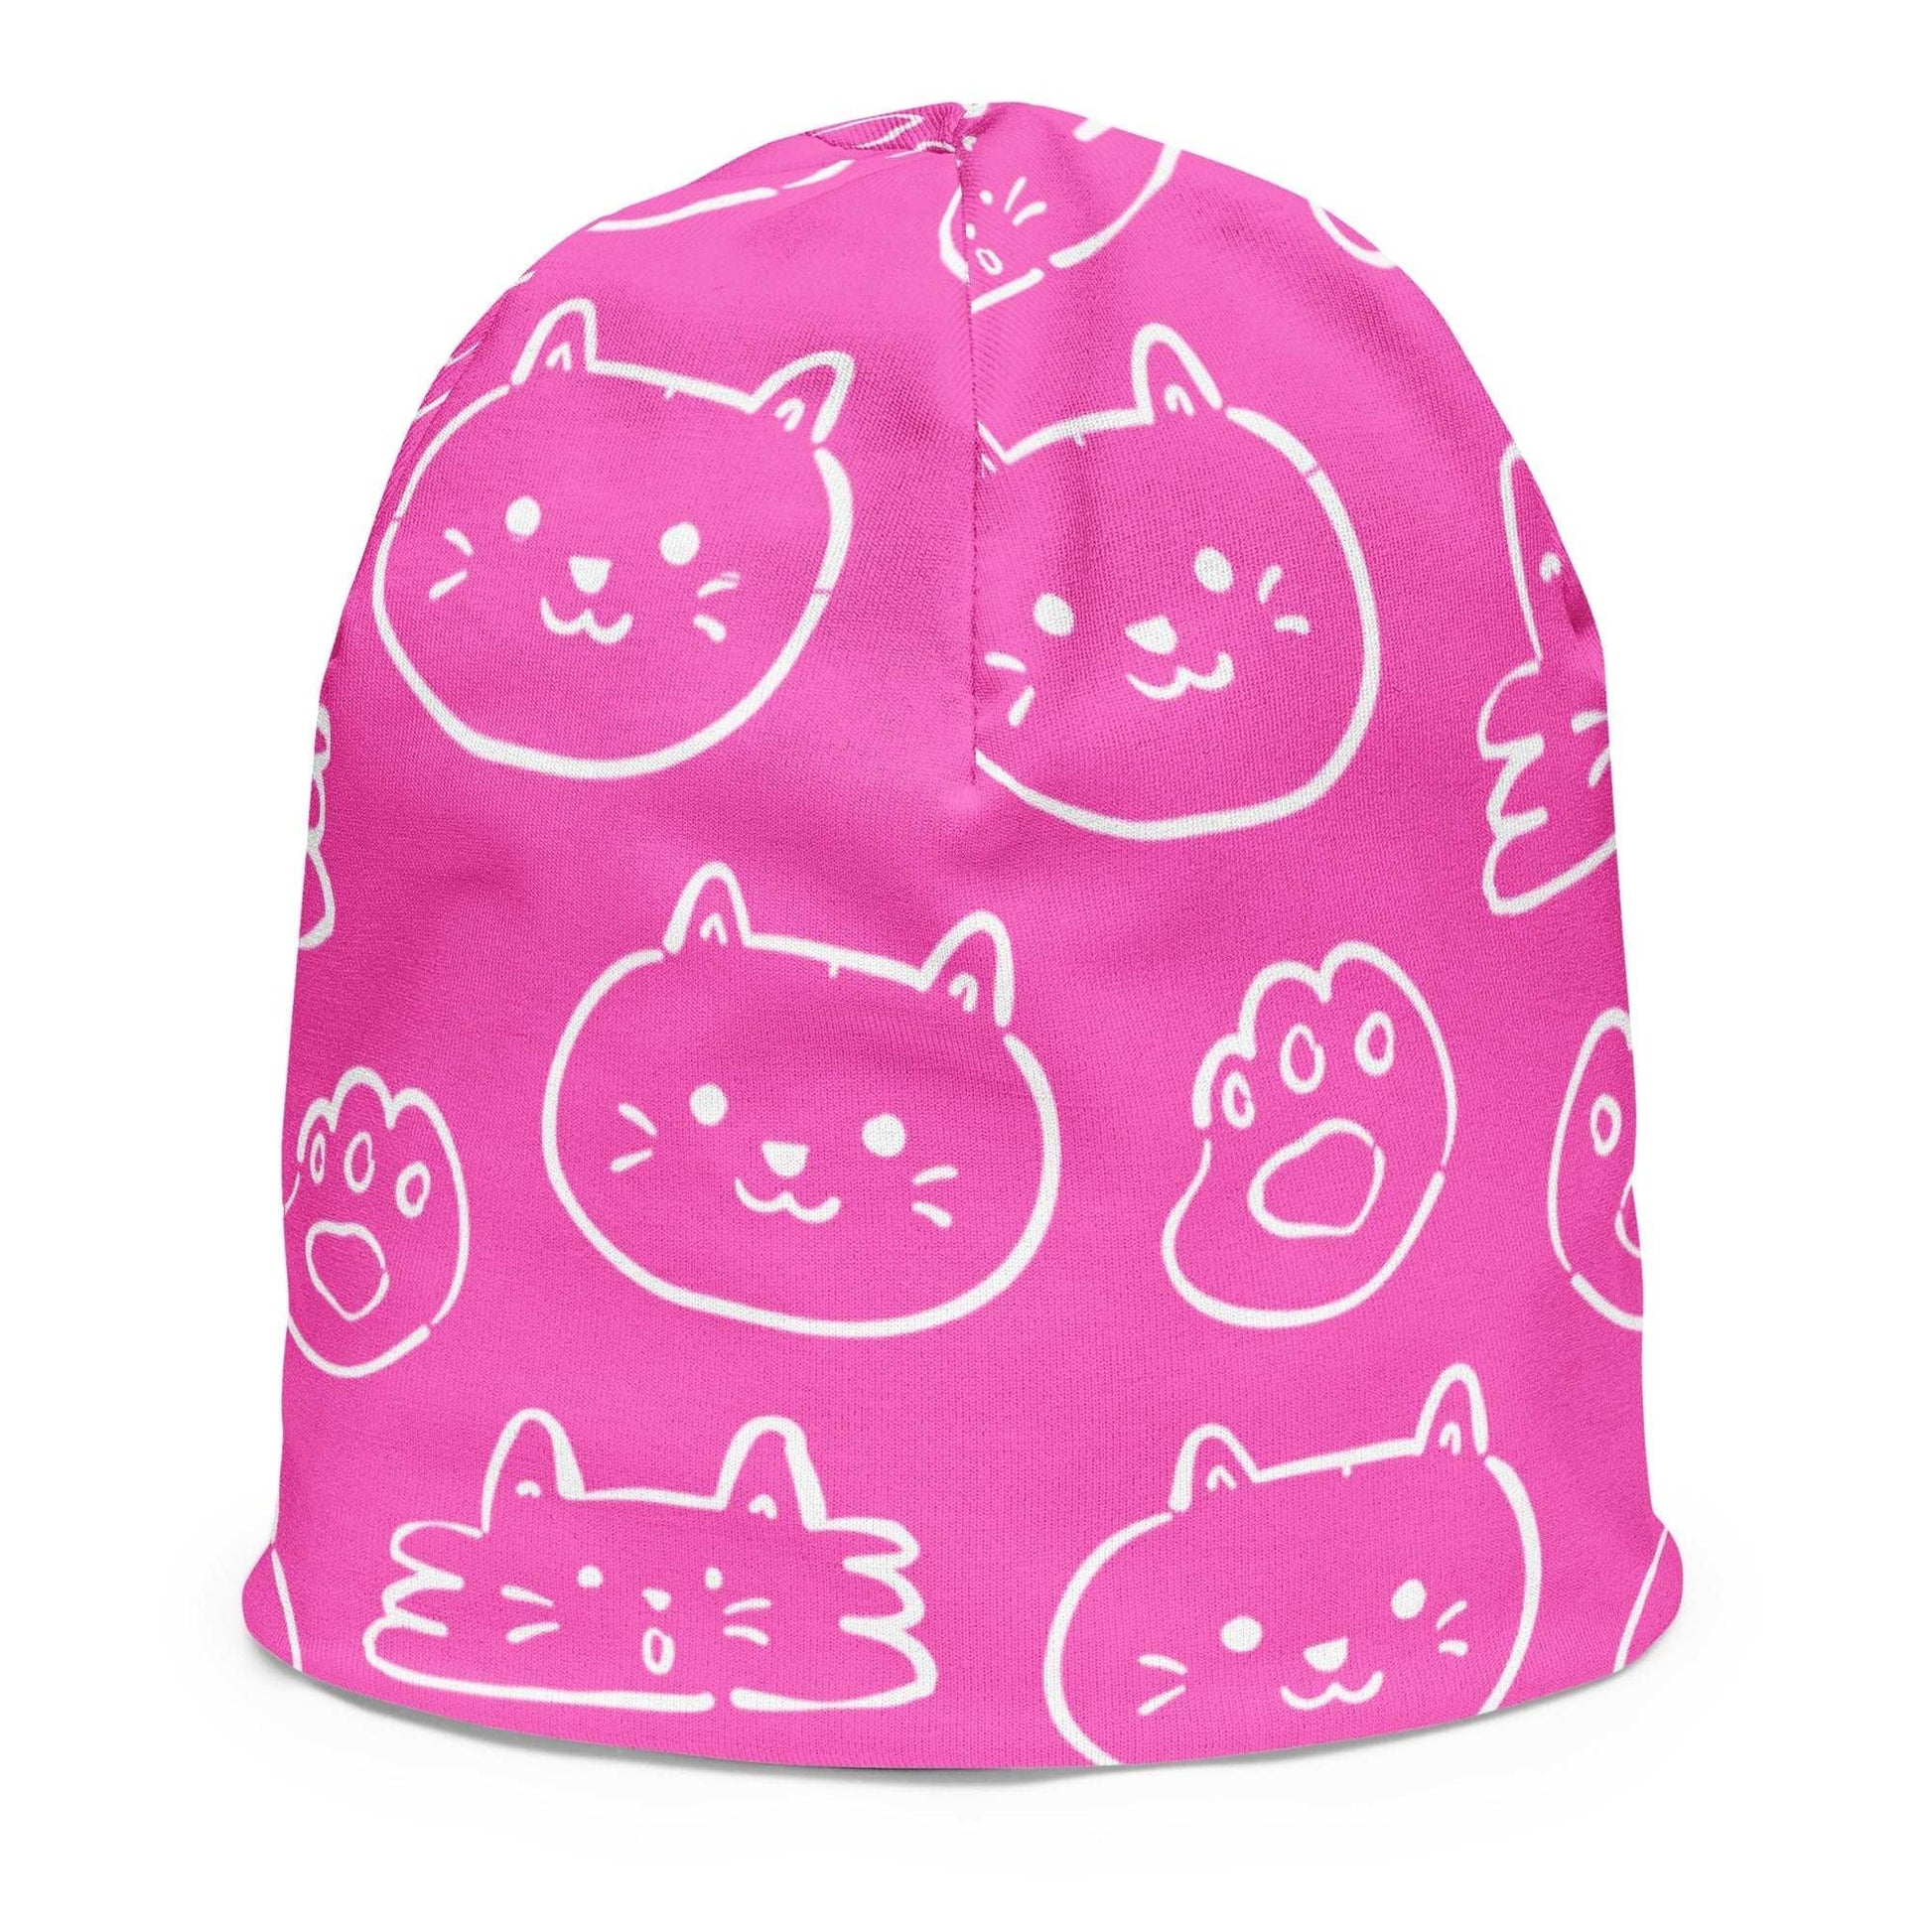 All-Over Cute Animals Print Girl's Beanie FLAKOUT